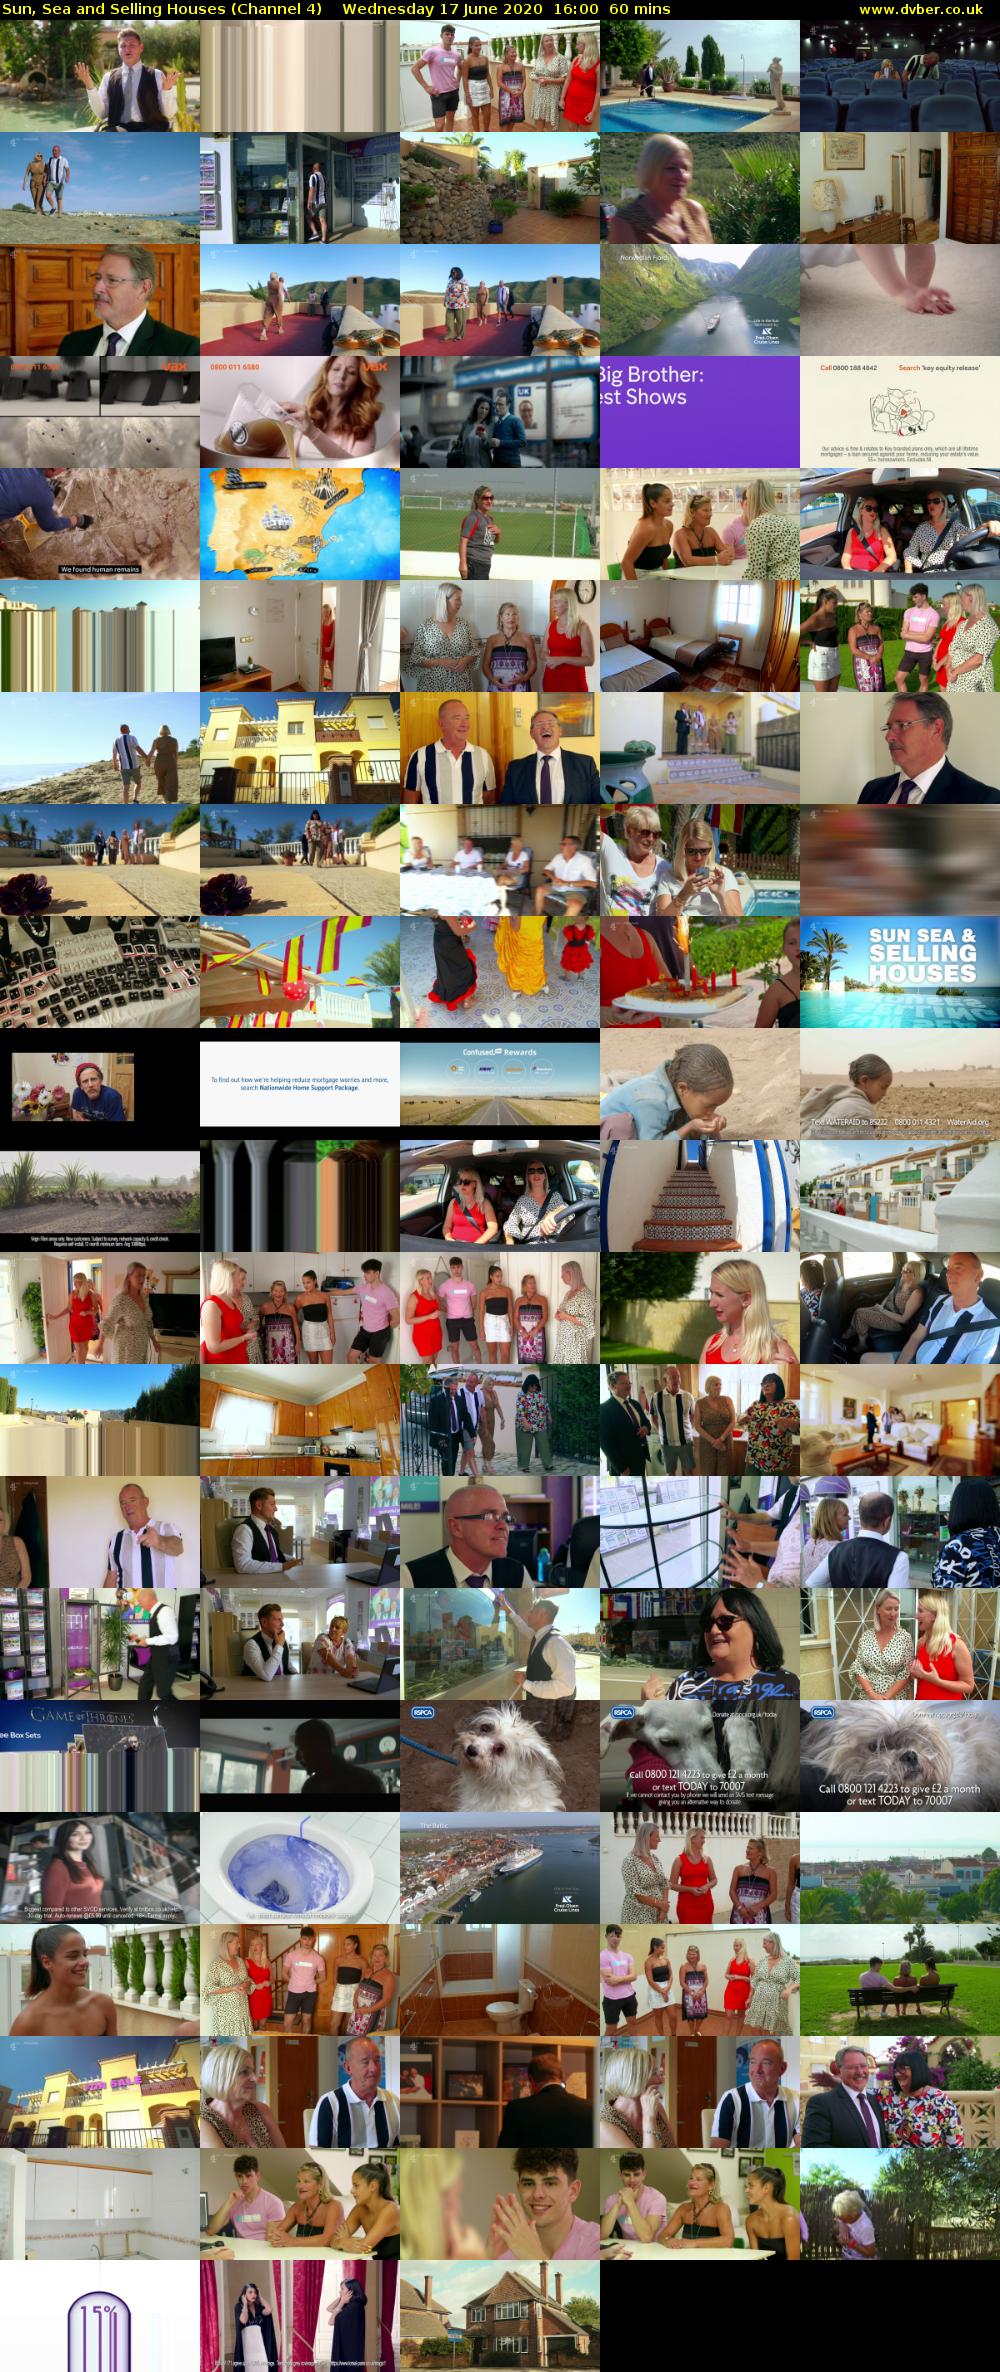 Sun, Sea and Selling Houses (Channel 4) Wednesday 17 June 2020 16:00 - 17:00